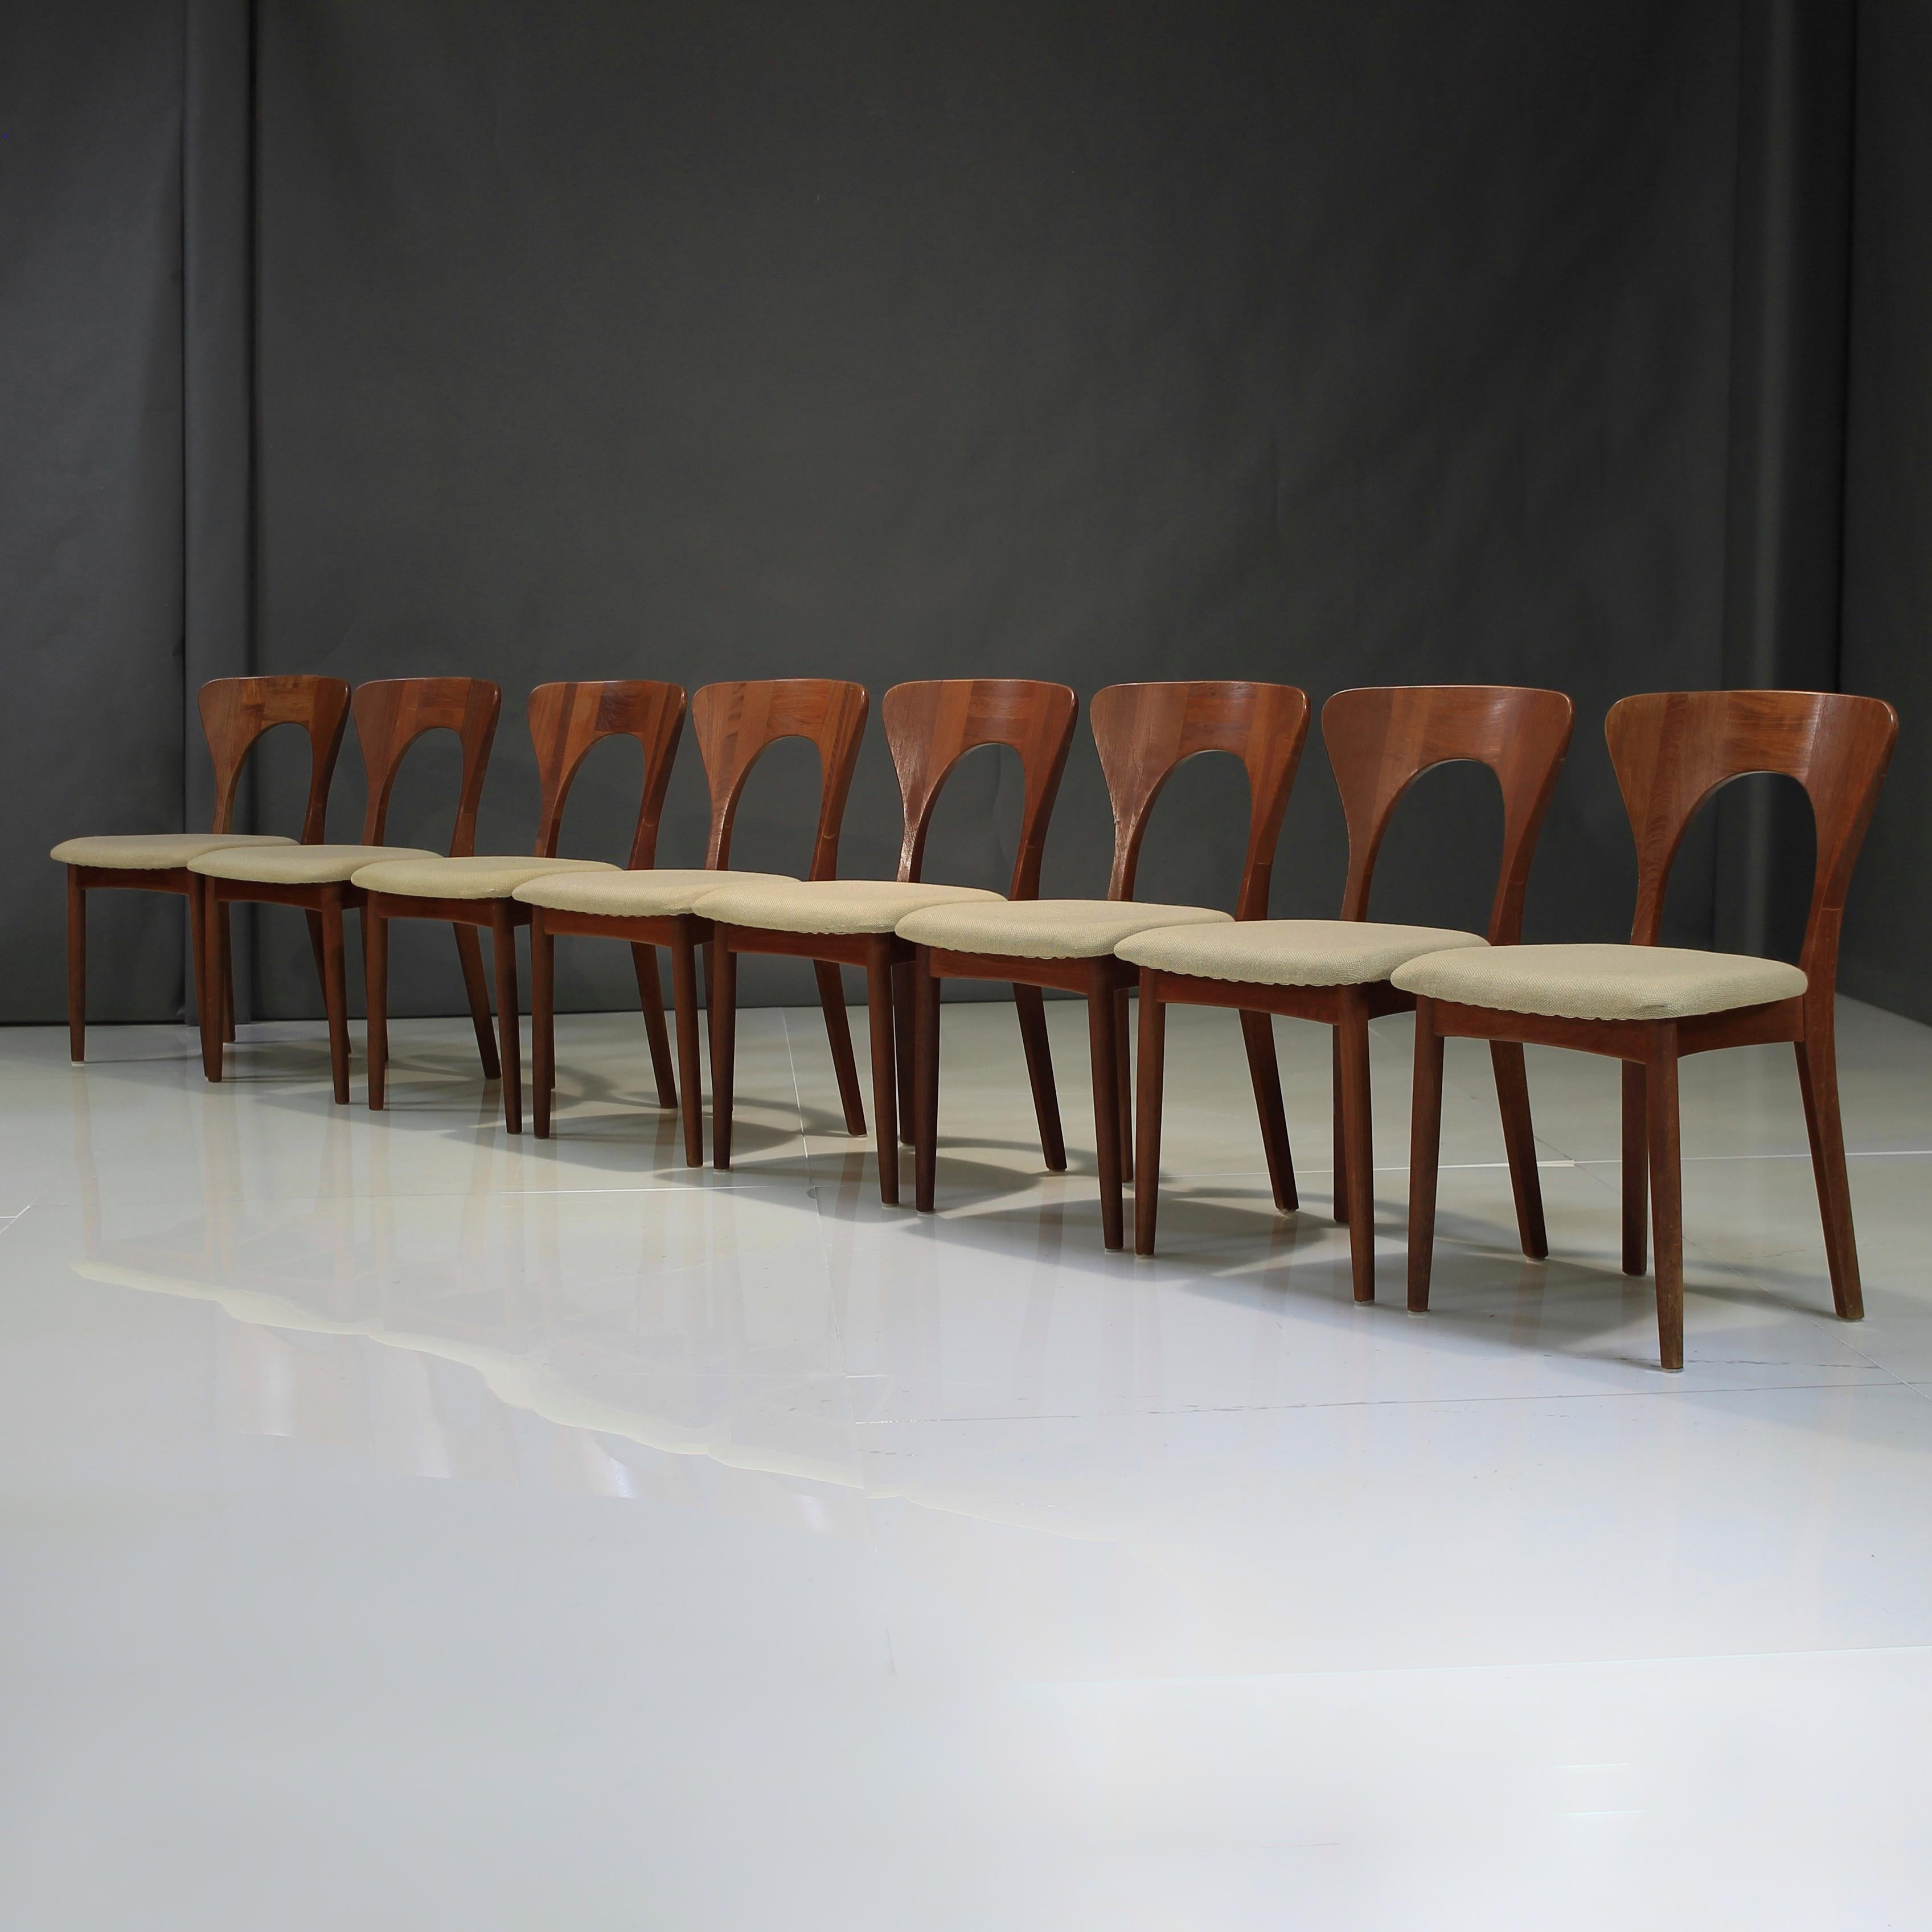 Presenting this wonderful vintage set of 8 Teak ‘Peter’ Chairs by Niels Koefoed for Koefoeds Hornslet.  

Showcasing beautifully aged Teak with some of the finest lines and detailed craftsmanship coming out of Denmark.    From the sculpted backs to